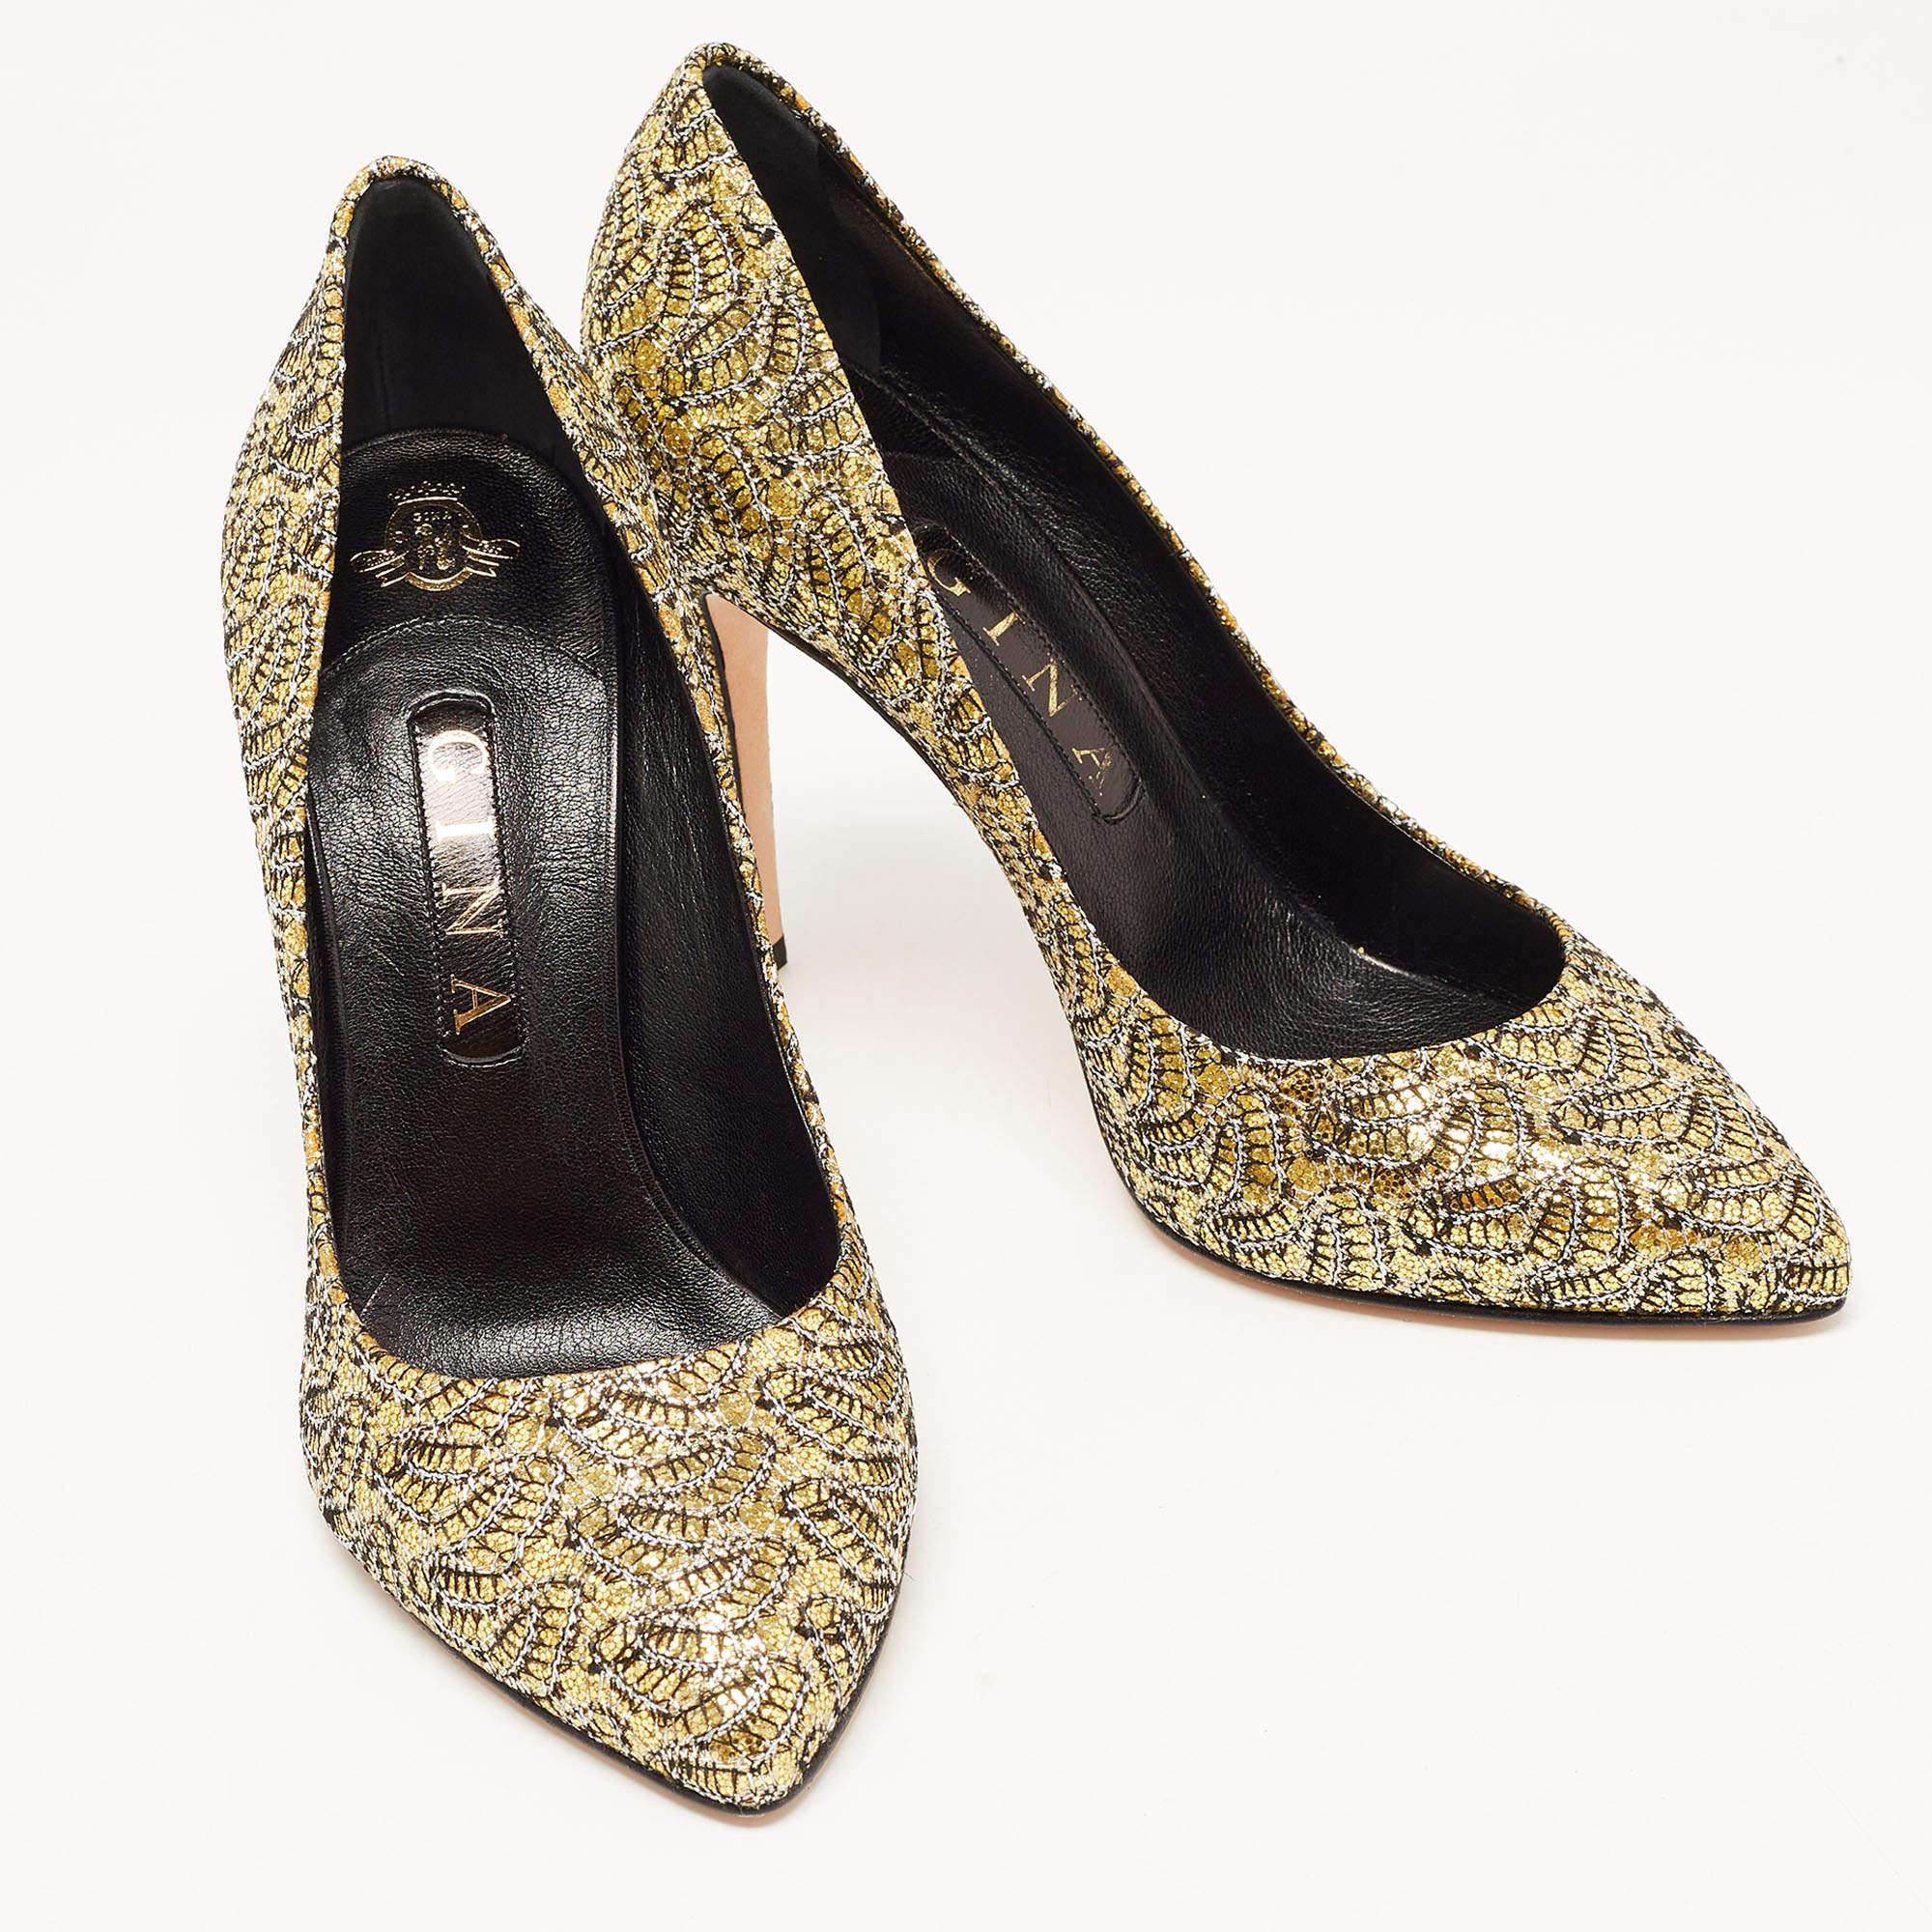 Women's Gina Metallic Gold/Silver Glitter Lace Pointed Toe Pumps Size 40